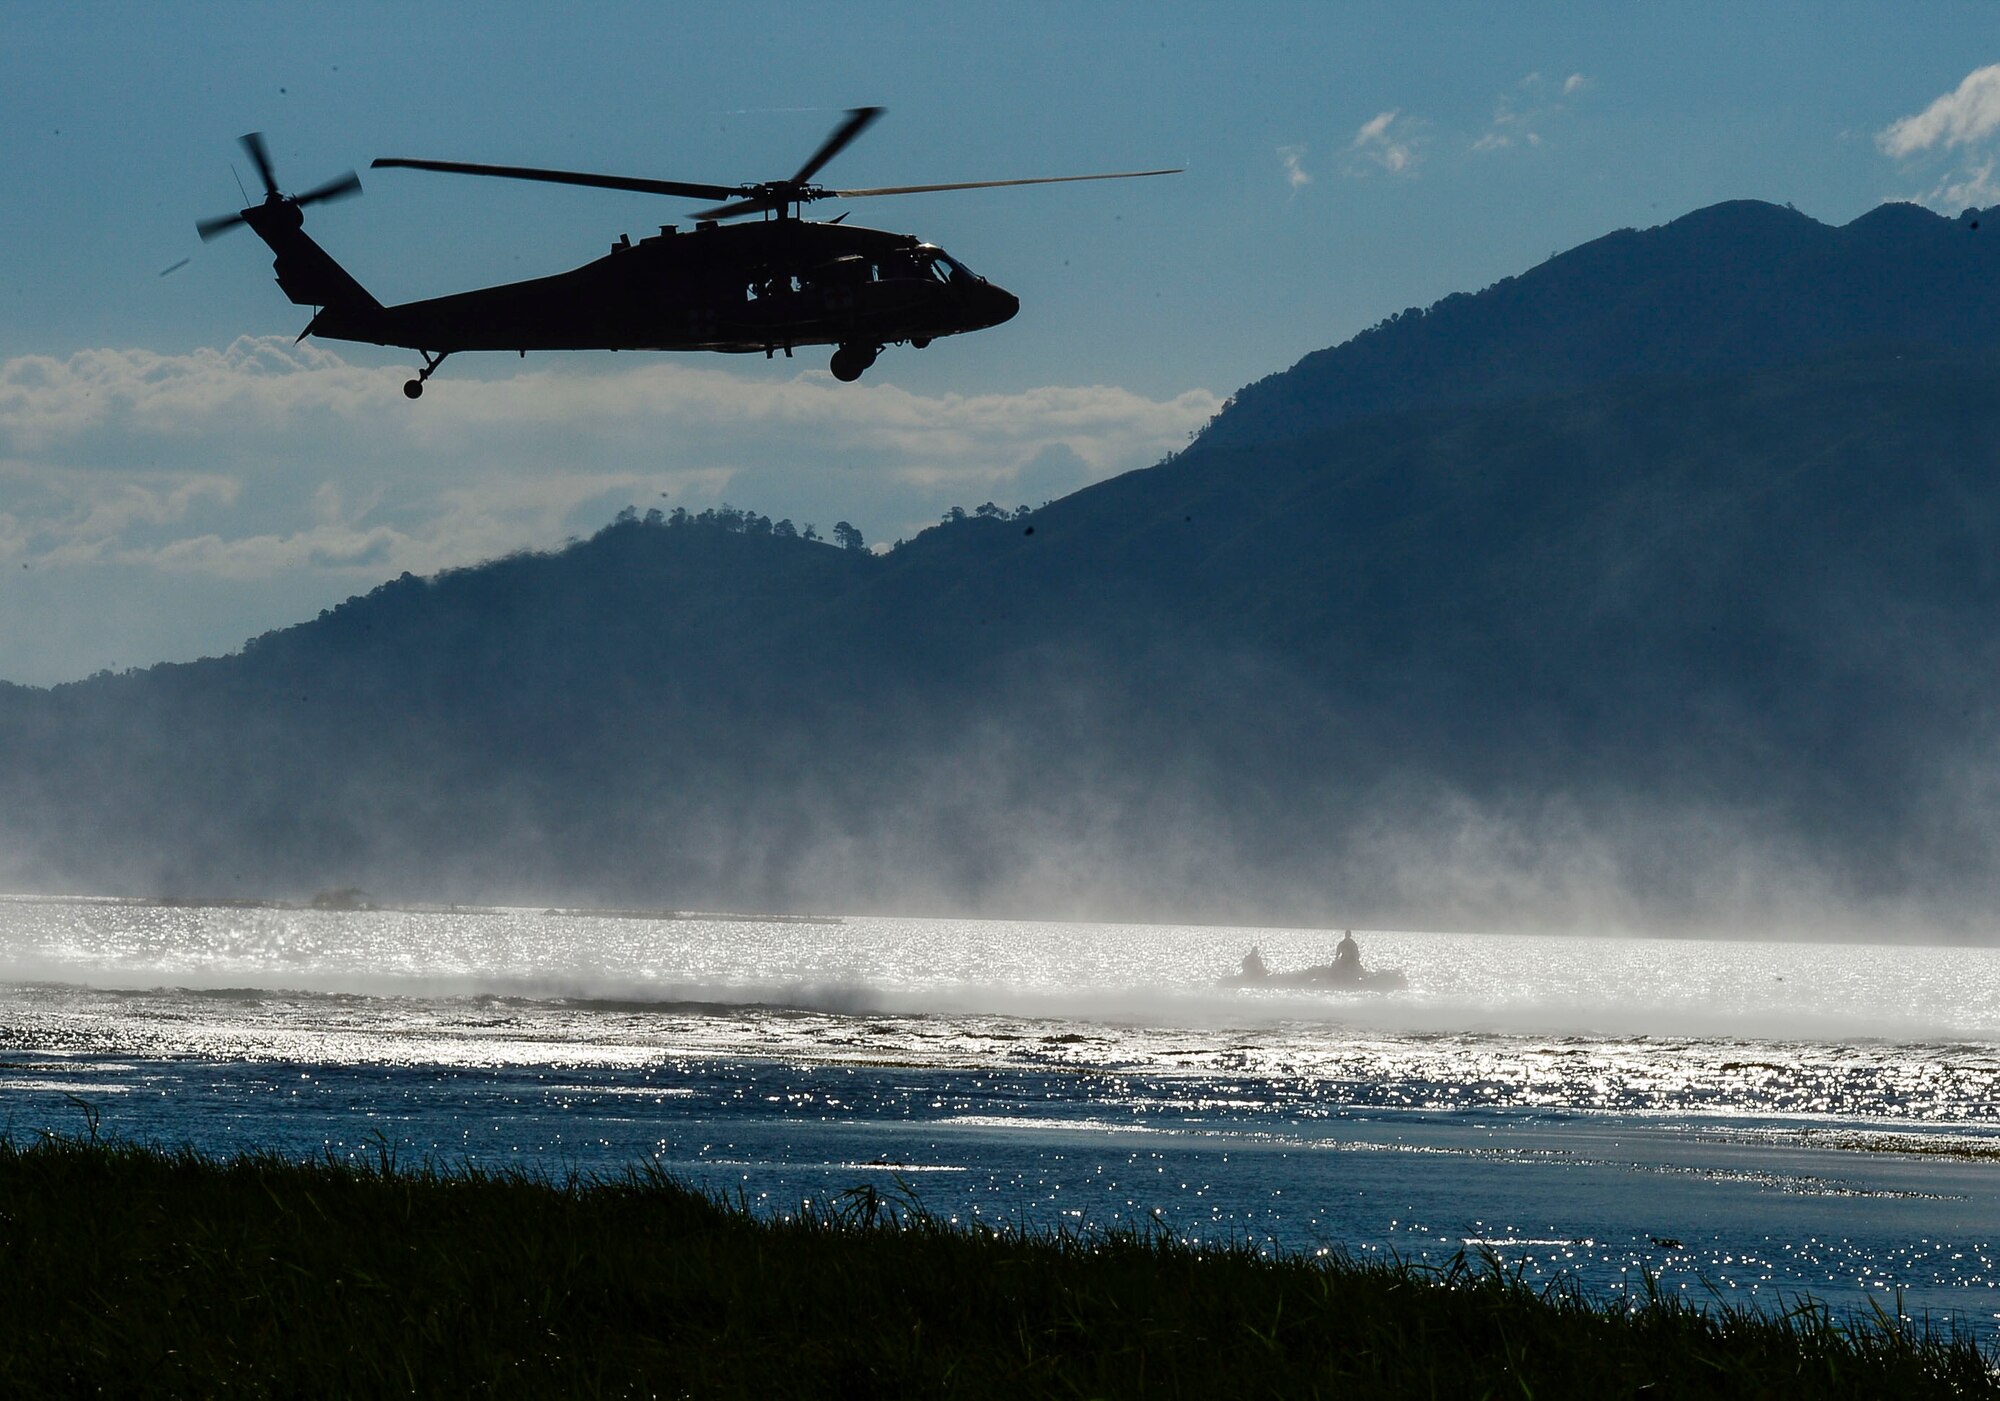 A UH-60 Black Hawk helicopter assigned to the 1-228th Aviation Regiment hovers over U.S. Army Special Operations members during over water hoist training at Lake Yojoa, Honduras, Jan. 22, 2015.   The 1-228th Aviation Regiment partnered with U.S. Army Special Operations personnel to practice recovering live personnel. The overwater hoist training was held to ensure members of Joint Task Force-Bravo are planning and preparing for crisis and contingency response, as well as countering transnational organized crime, and counterterrorism operations as part of U.S. Southern Command’s mission. Contingency planning prepares the command for various scenarios that pose the greatest probability of challenging our regional partners or threatening our national interests. (U.S. Air Force photo/Tech. Sgt. Heather Redman)